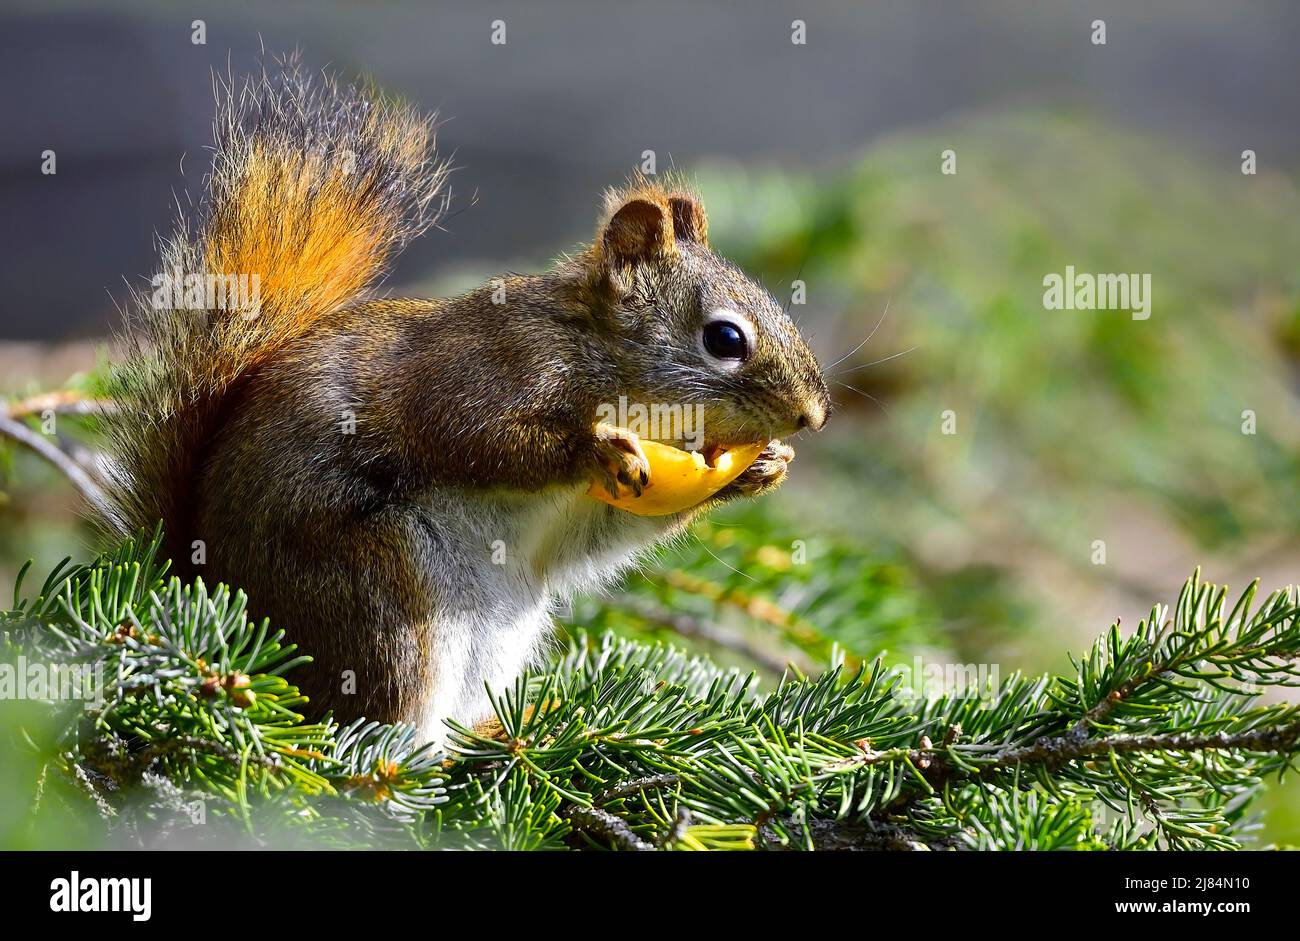 A wild Red Squirrel 'Tamiasciurus hudsonicus', feeding on a piece of fruit while sitting on a spruce tree branch in rural Alberta Canada Stock Photo